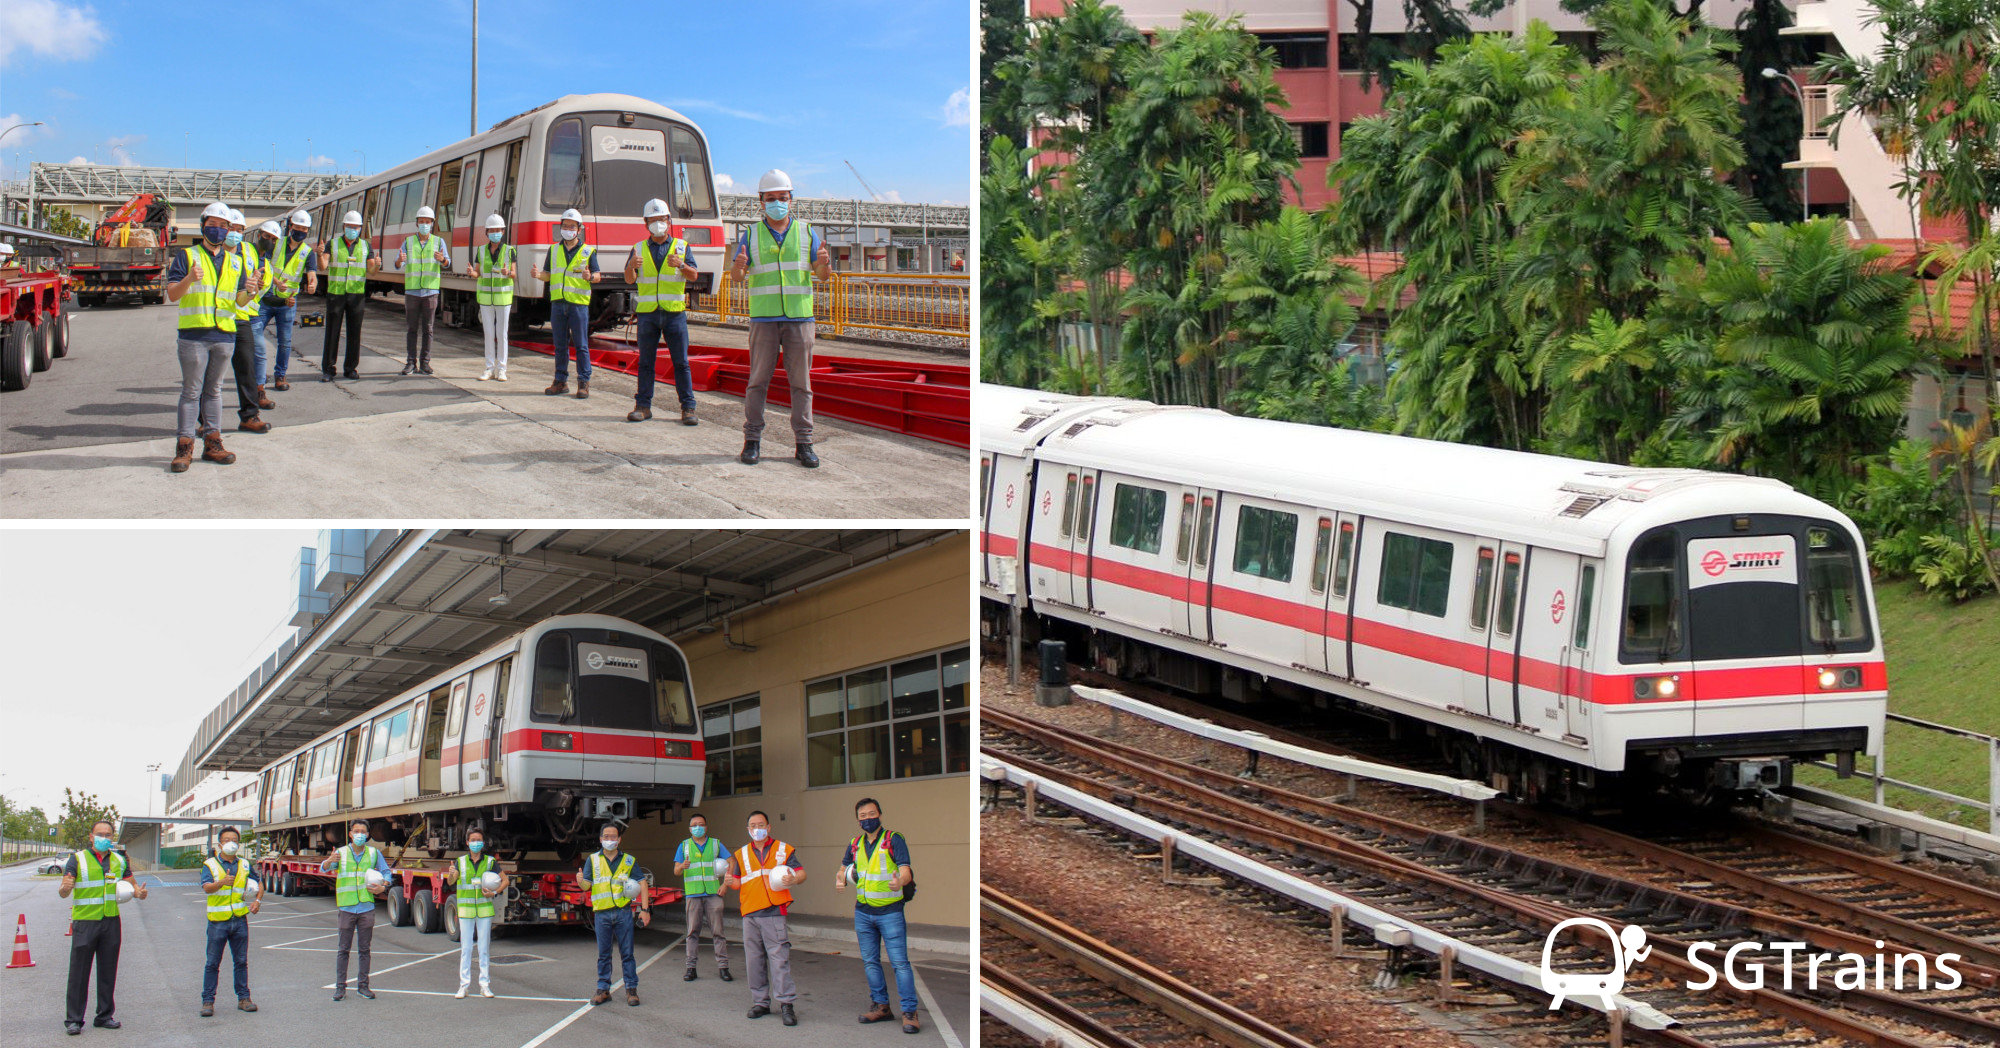 Decommissioned Siemens C651 Trains Repurposed for Training with Singapore Police Force